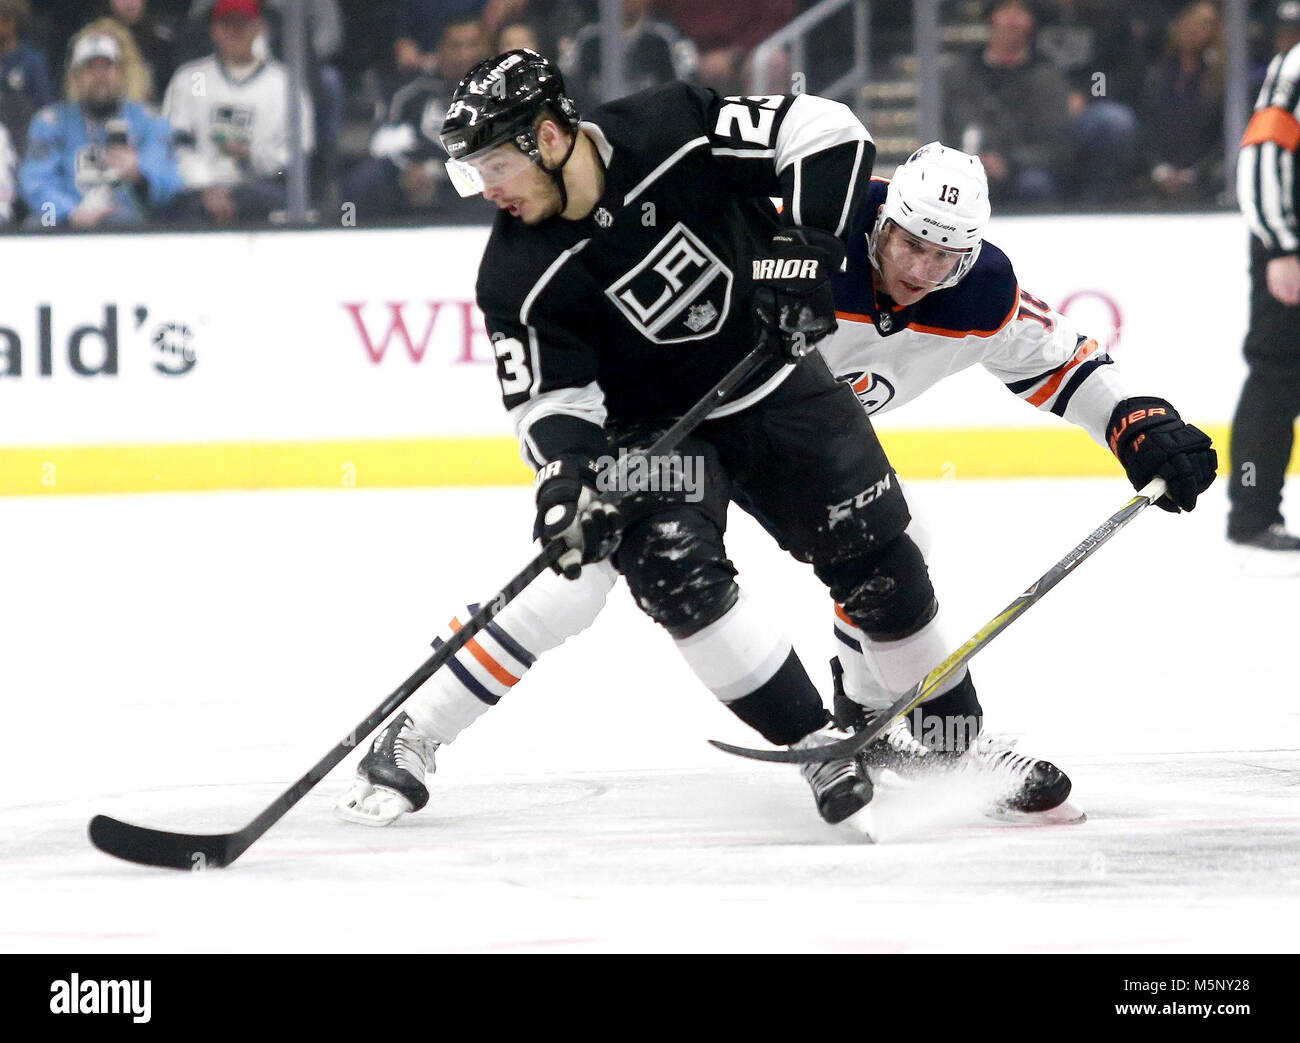 Los Angeles, California, USA. 24th Feb, 2018. Los Angeles Kings' forward Dustin Brown (23) and Edmonton Oilers' forward Michael Cammalleri (13) in actions during a 2017-2018 NHL hockey game in Los Angeles, on Feb. 24, 2018. Edmonton Oilers won 4-3. Credit: Ringo Chiu/ZUMA Wire/Alamy Live News Stock Photo